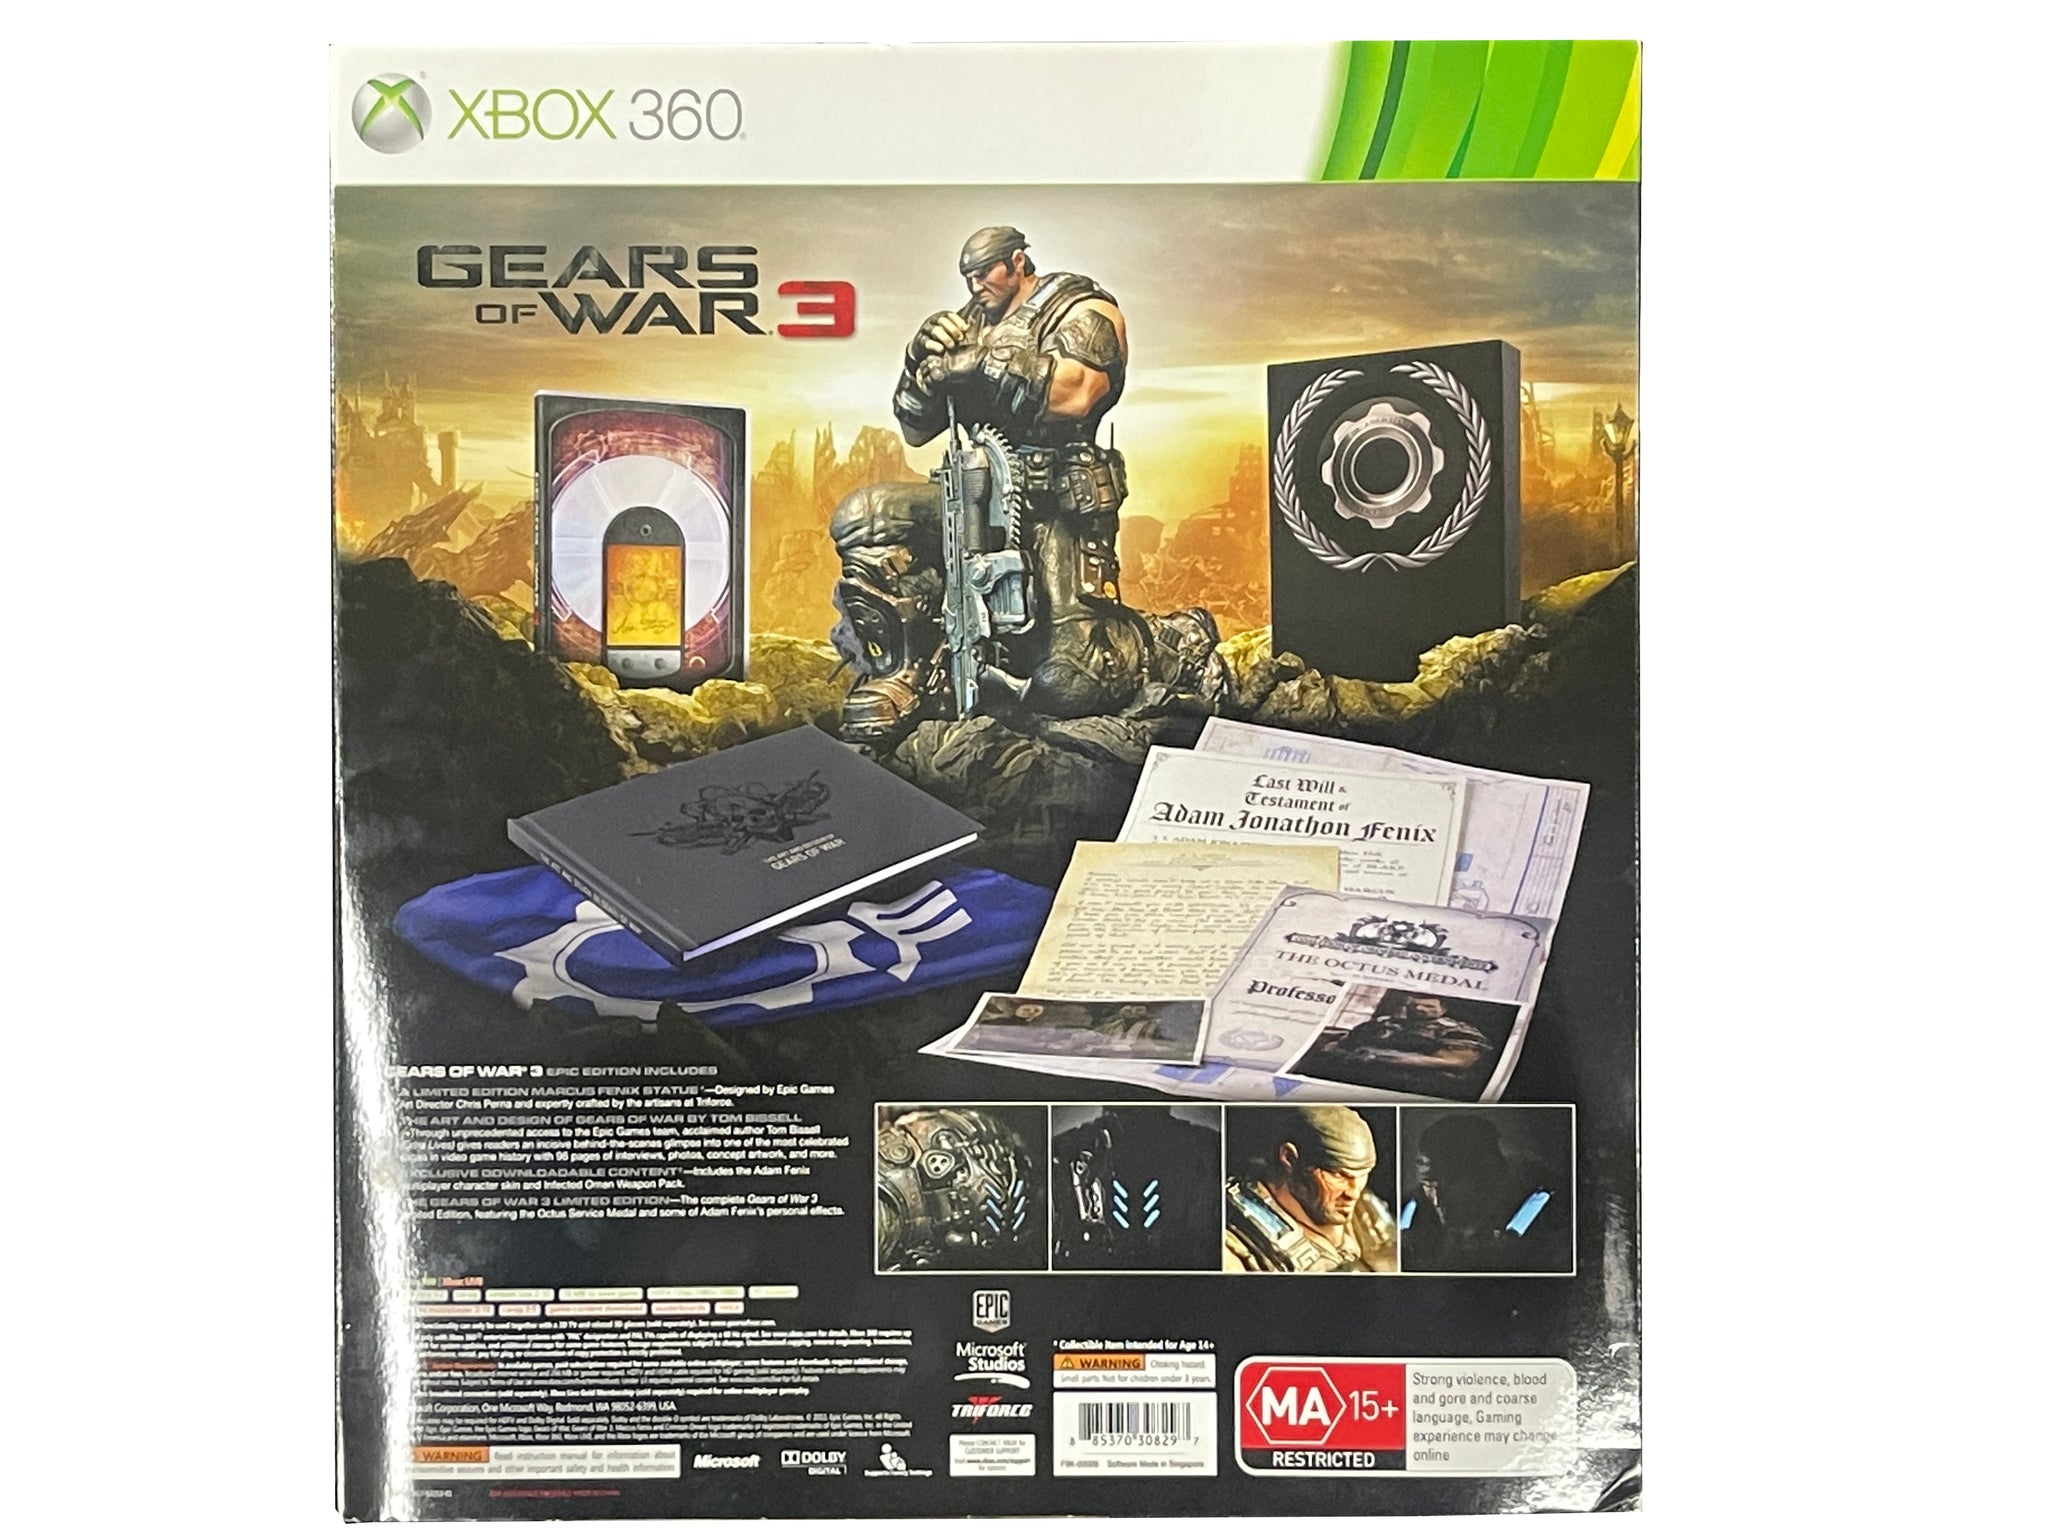 Gears Of War 3 Limited Collector's Epic Edition missing Game